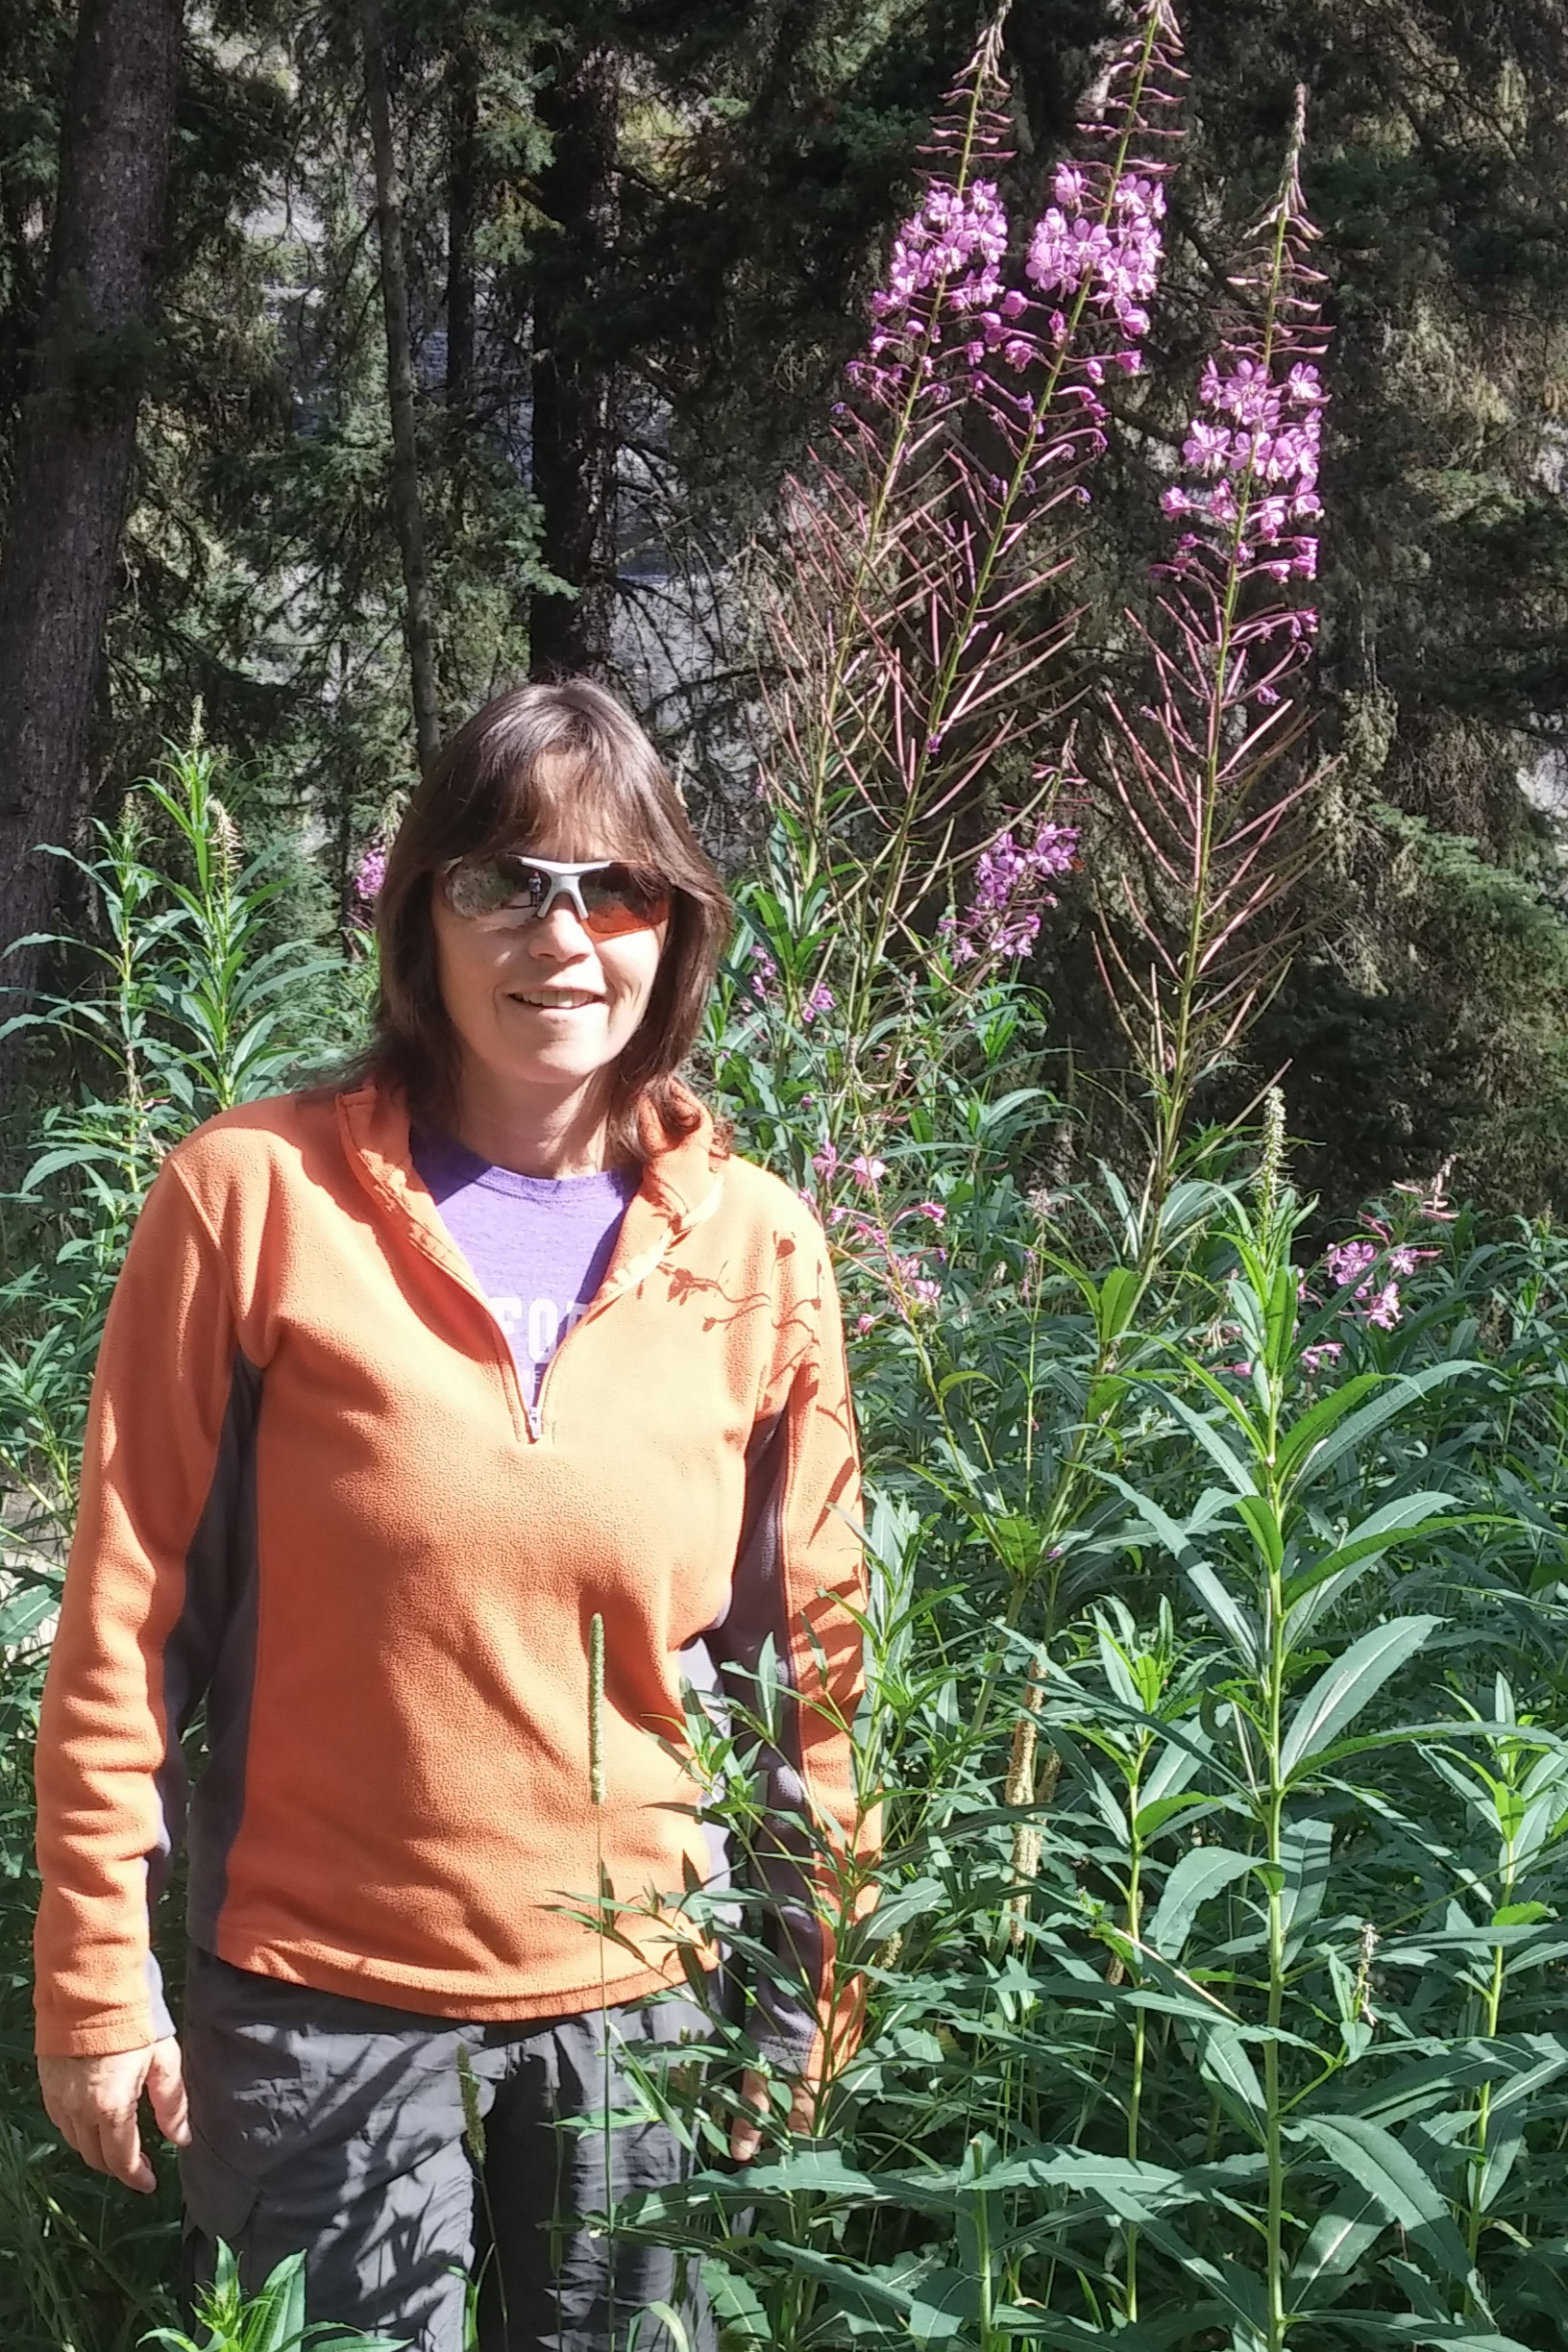 A white woman in an orange fleece and sunglasses stands next to a tall, purple-blooming flower.